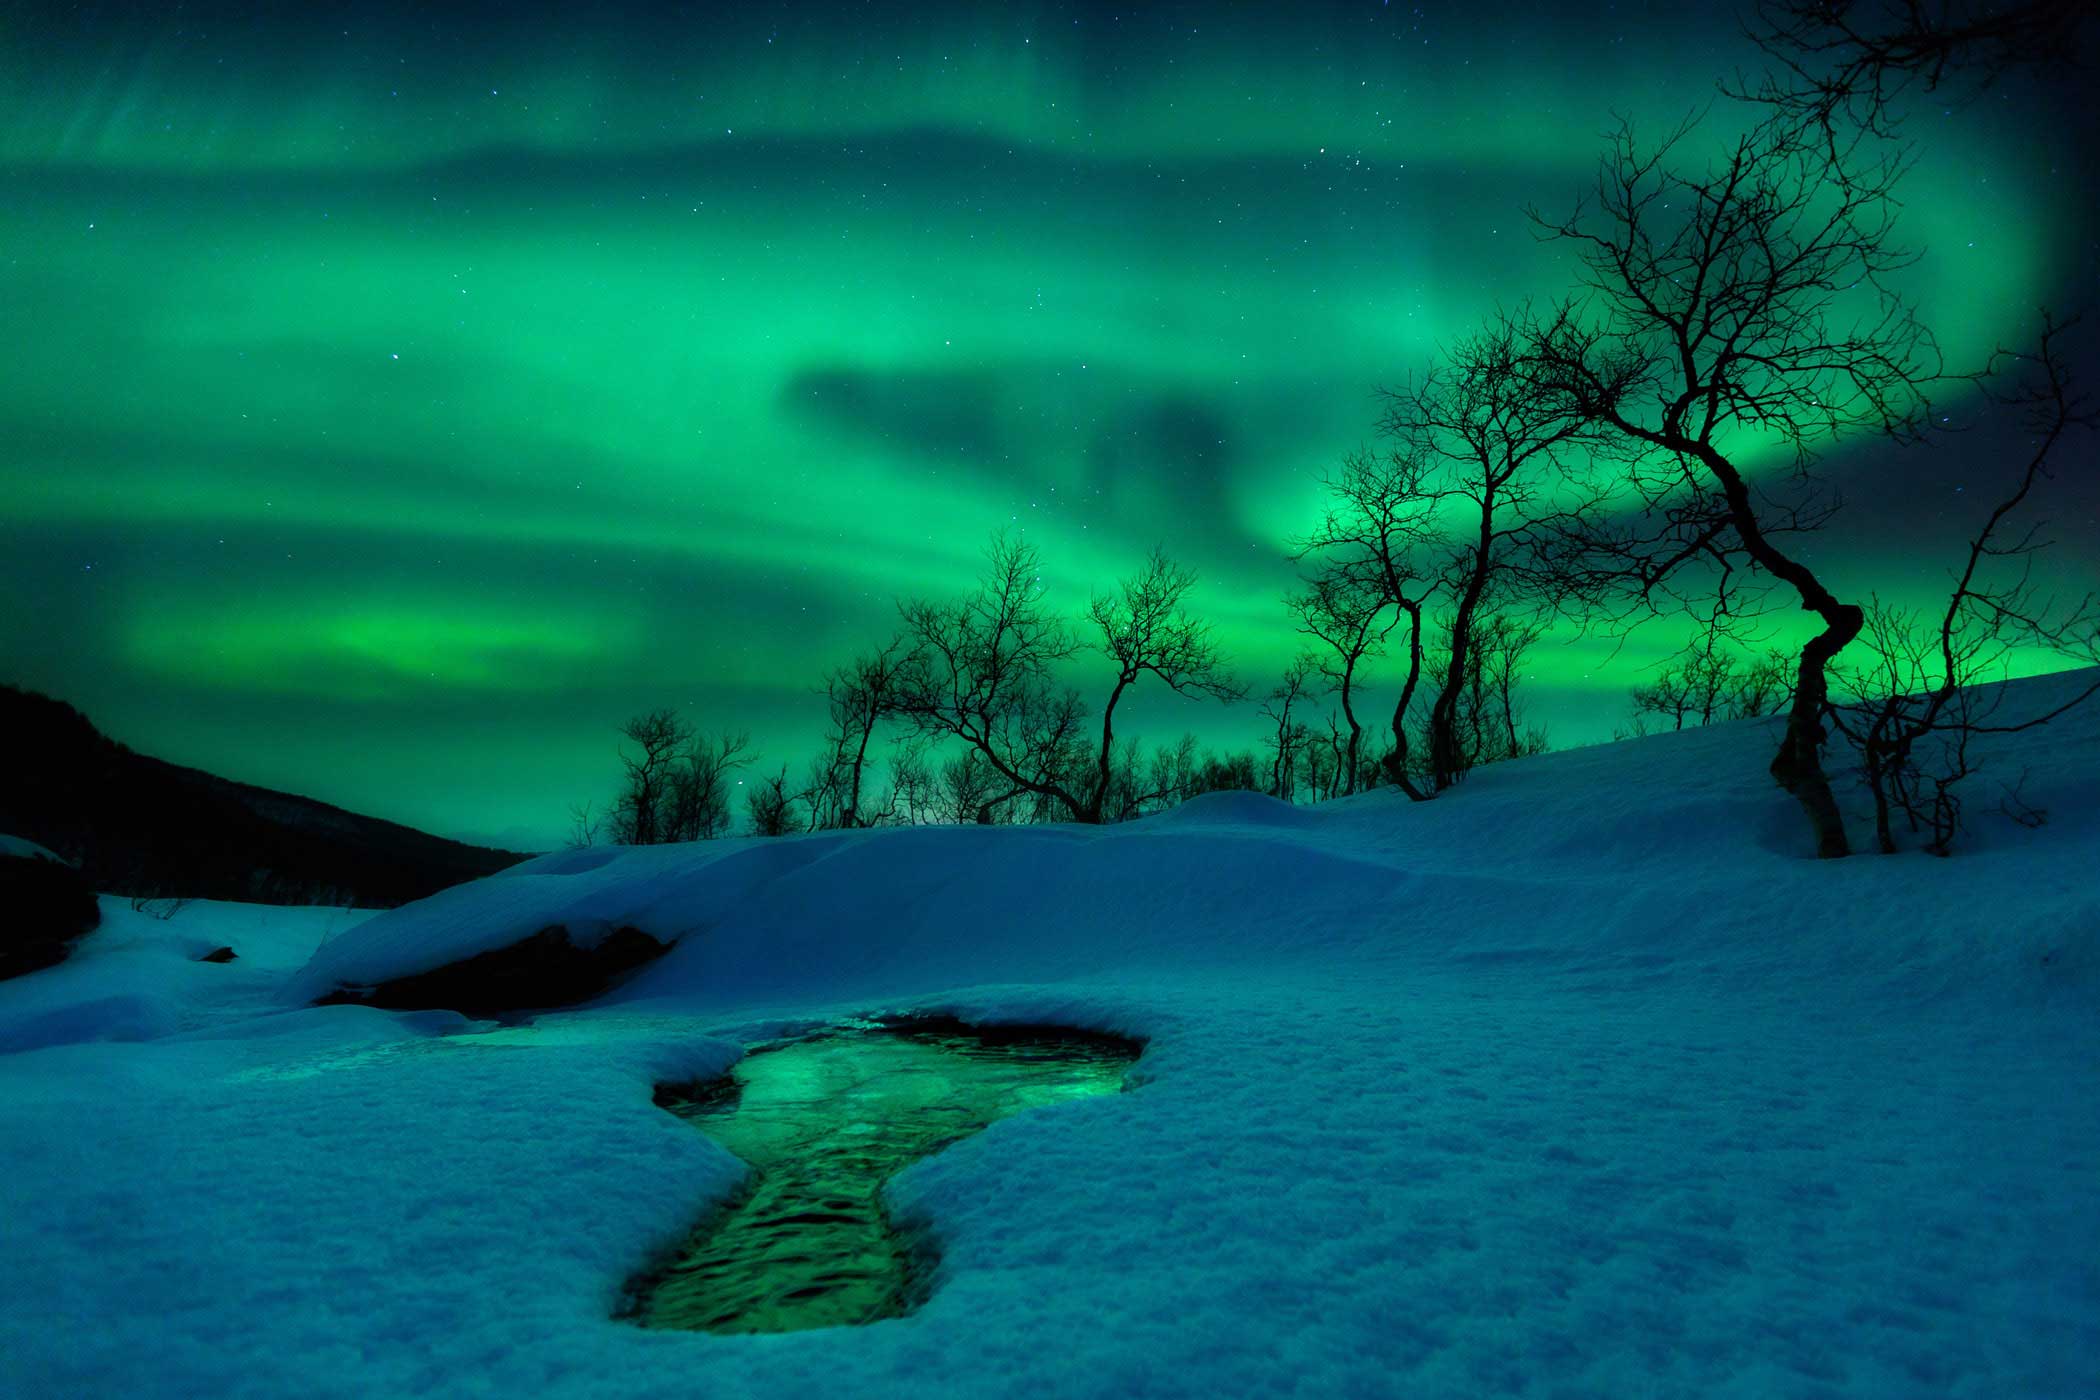 The aurora borealis traces the shifting patterns of the Earth's magnetic field, creating a spectacular midwinter show in Nordland Fylke, Norway. The green light in this image comes from oxygen atoms high in the atmosphere, which have been energized by subatomic particles from the solar wind.